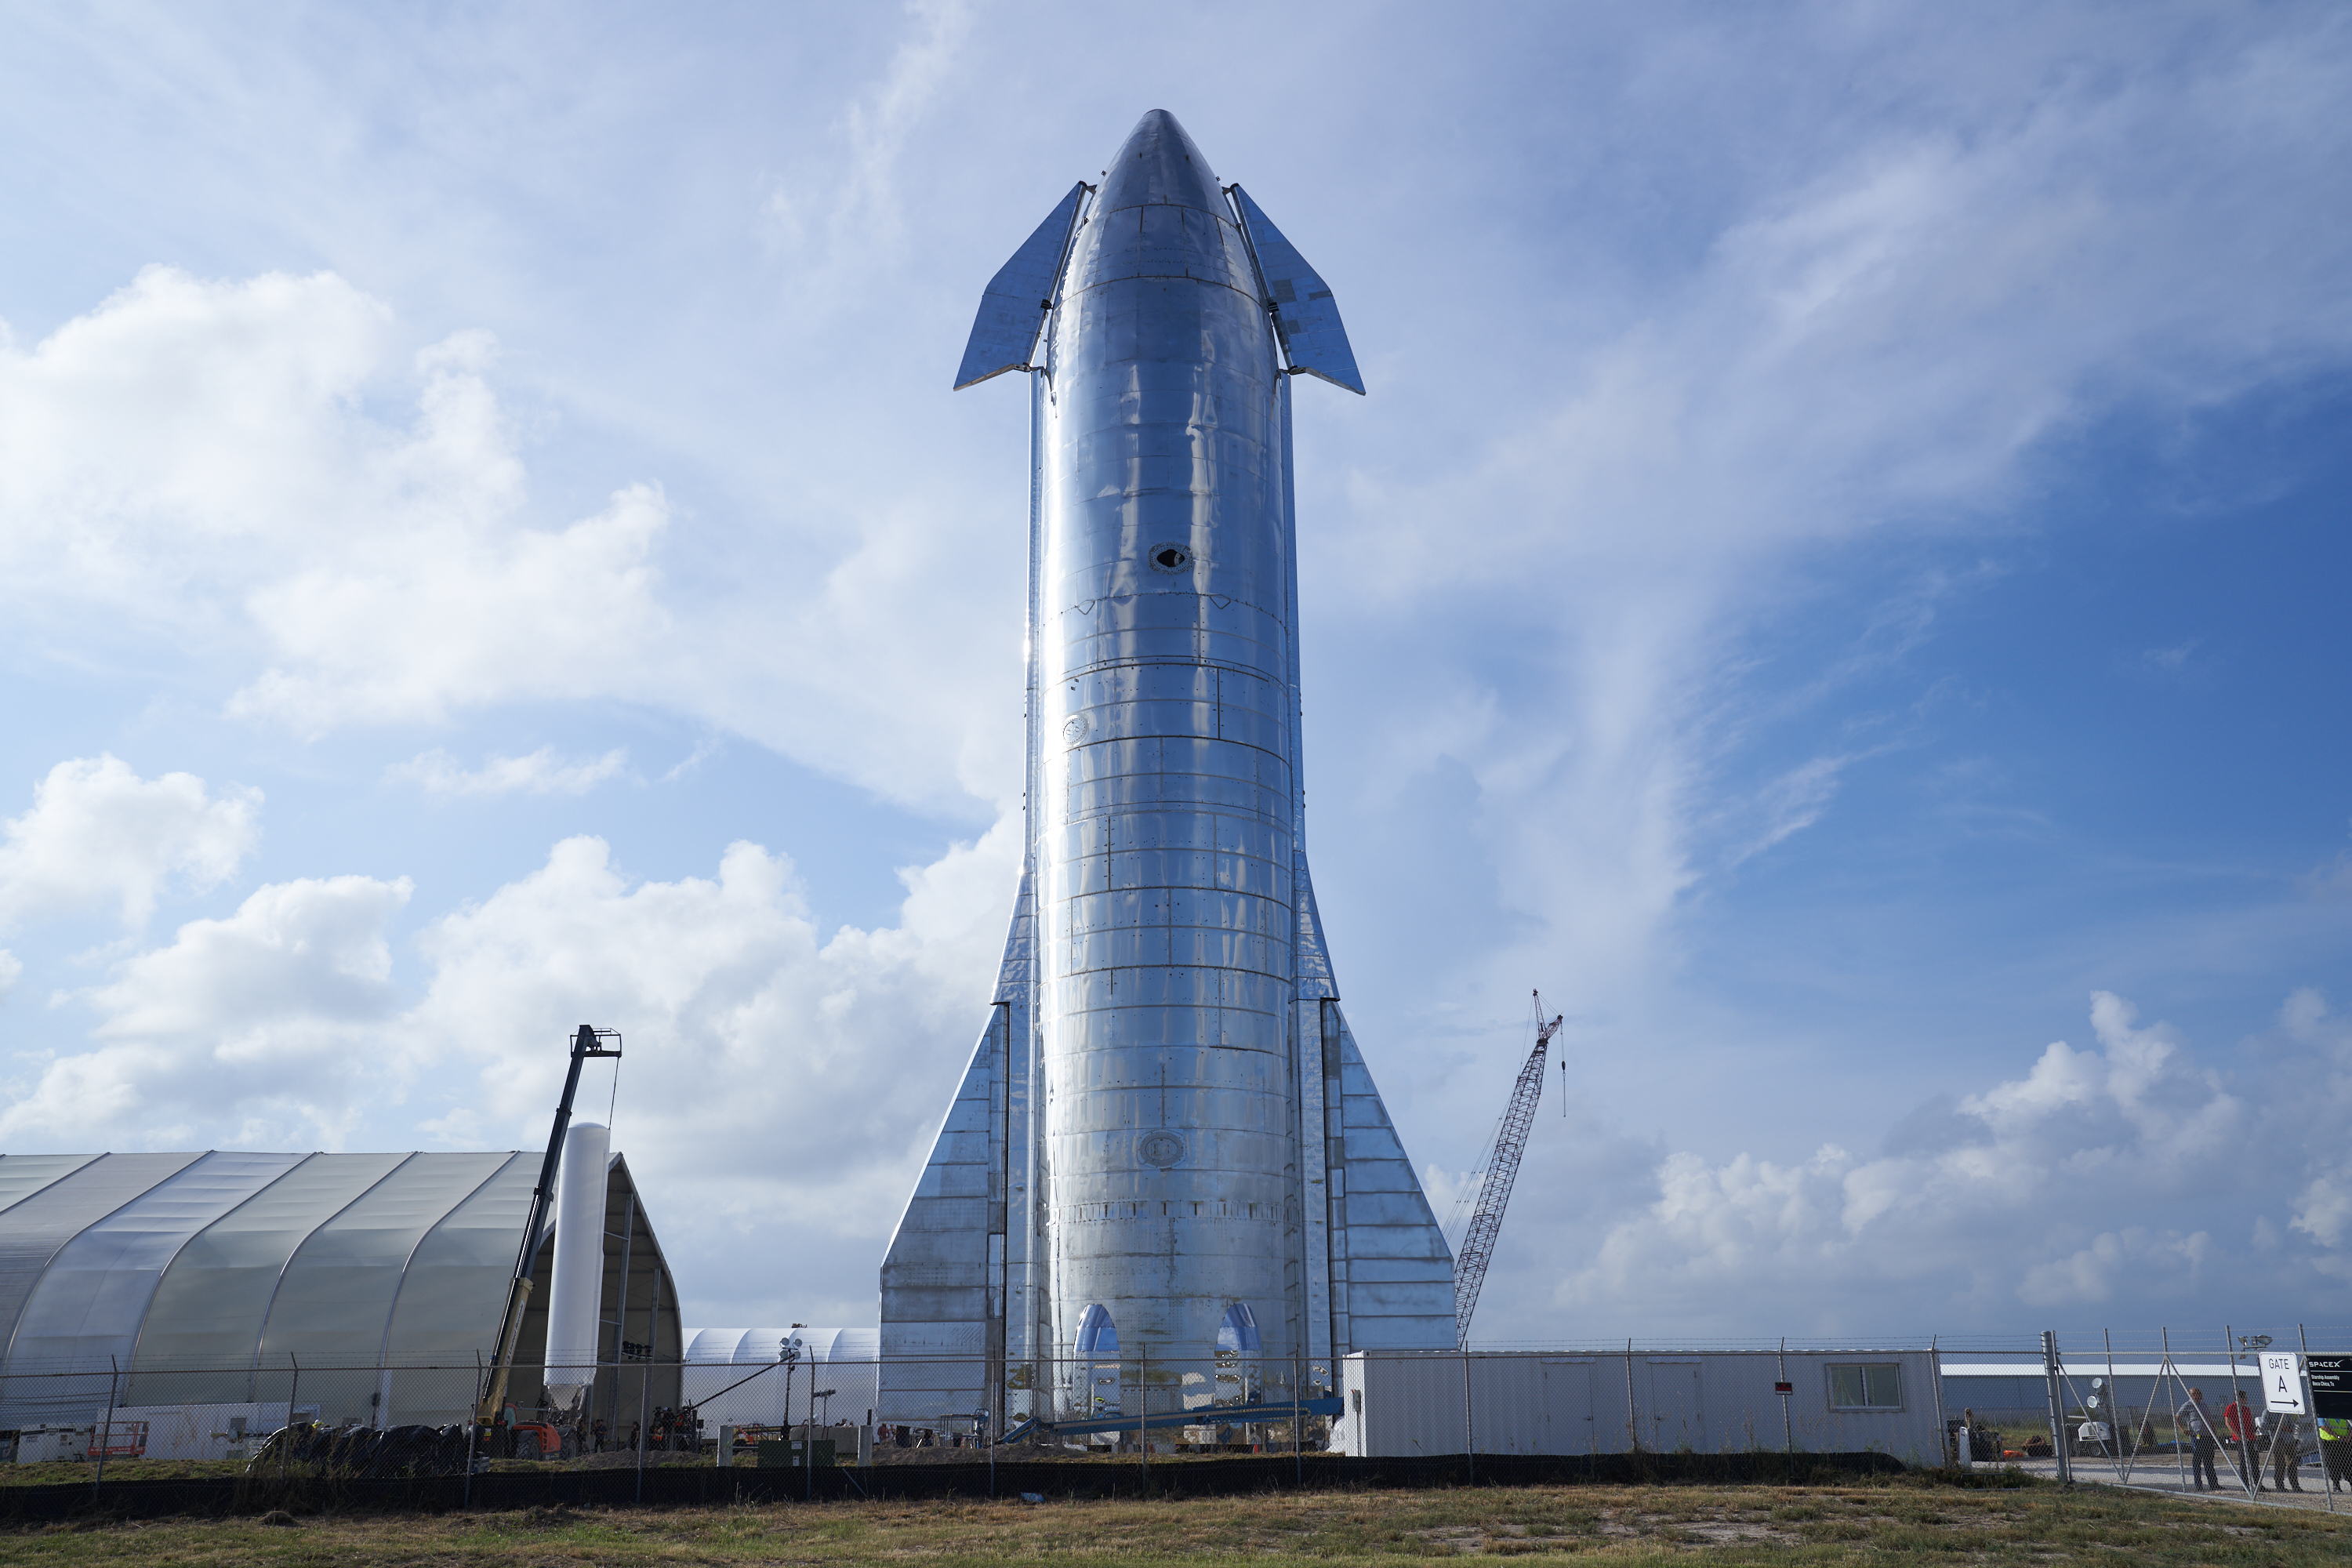 SpaceX details Starship and Super Heavy in new website | TechCrunch